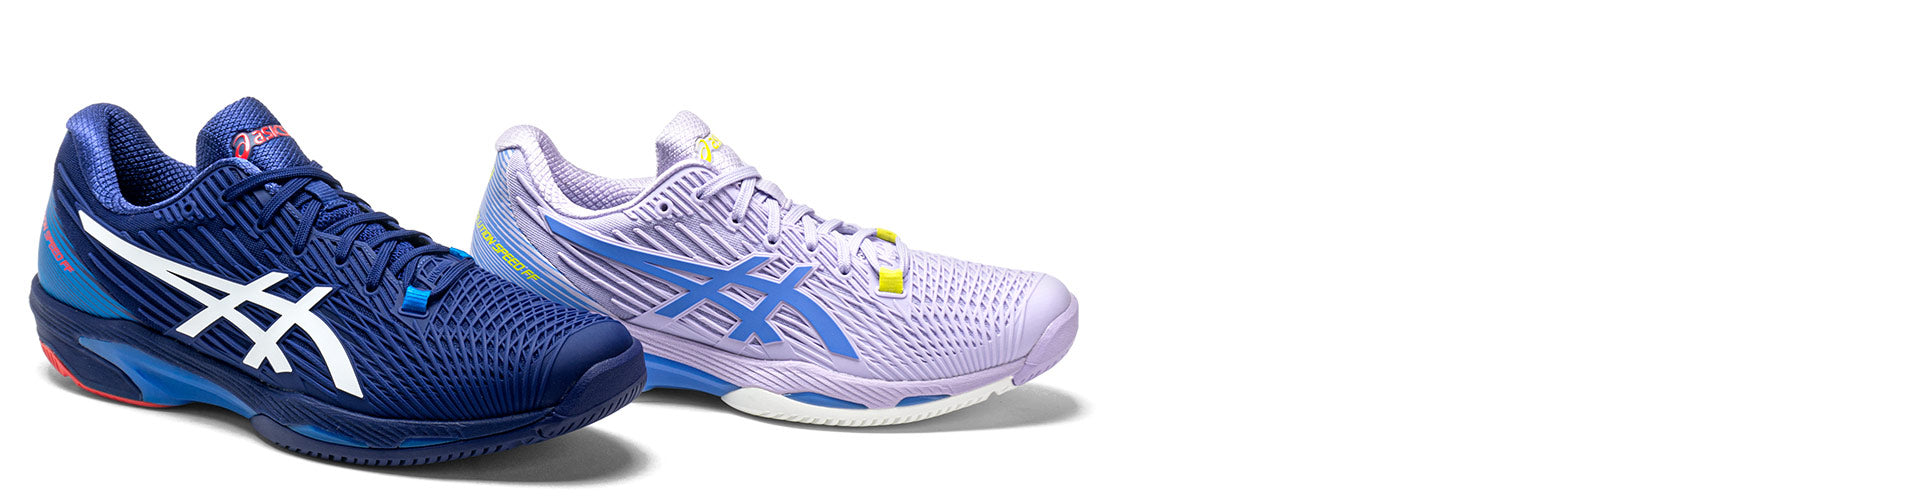 asics gel solution speed ff 2 tennis shoes on white background